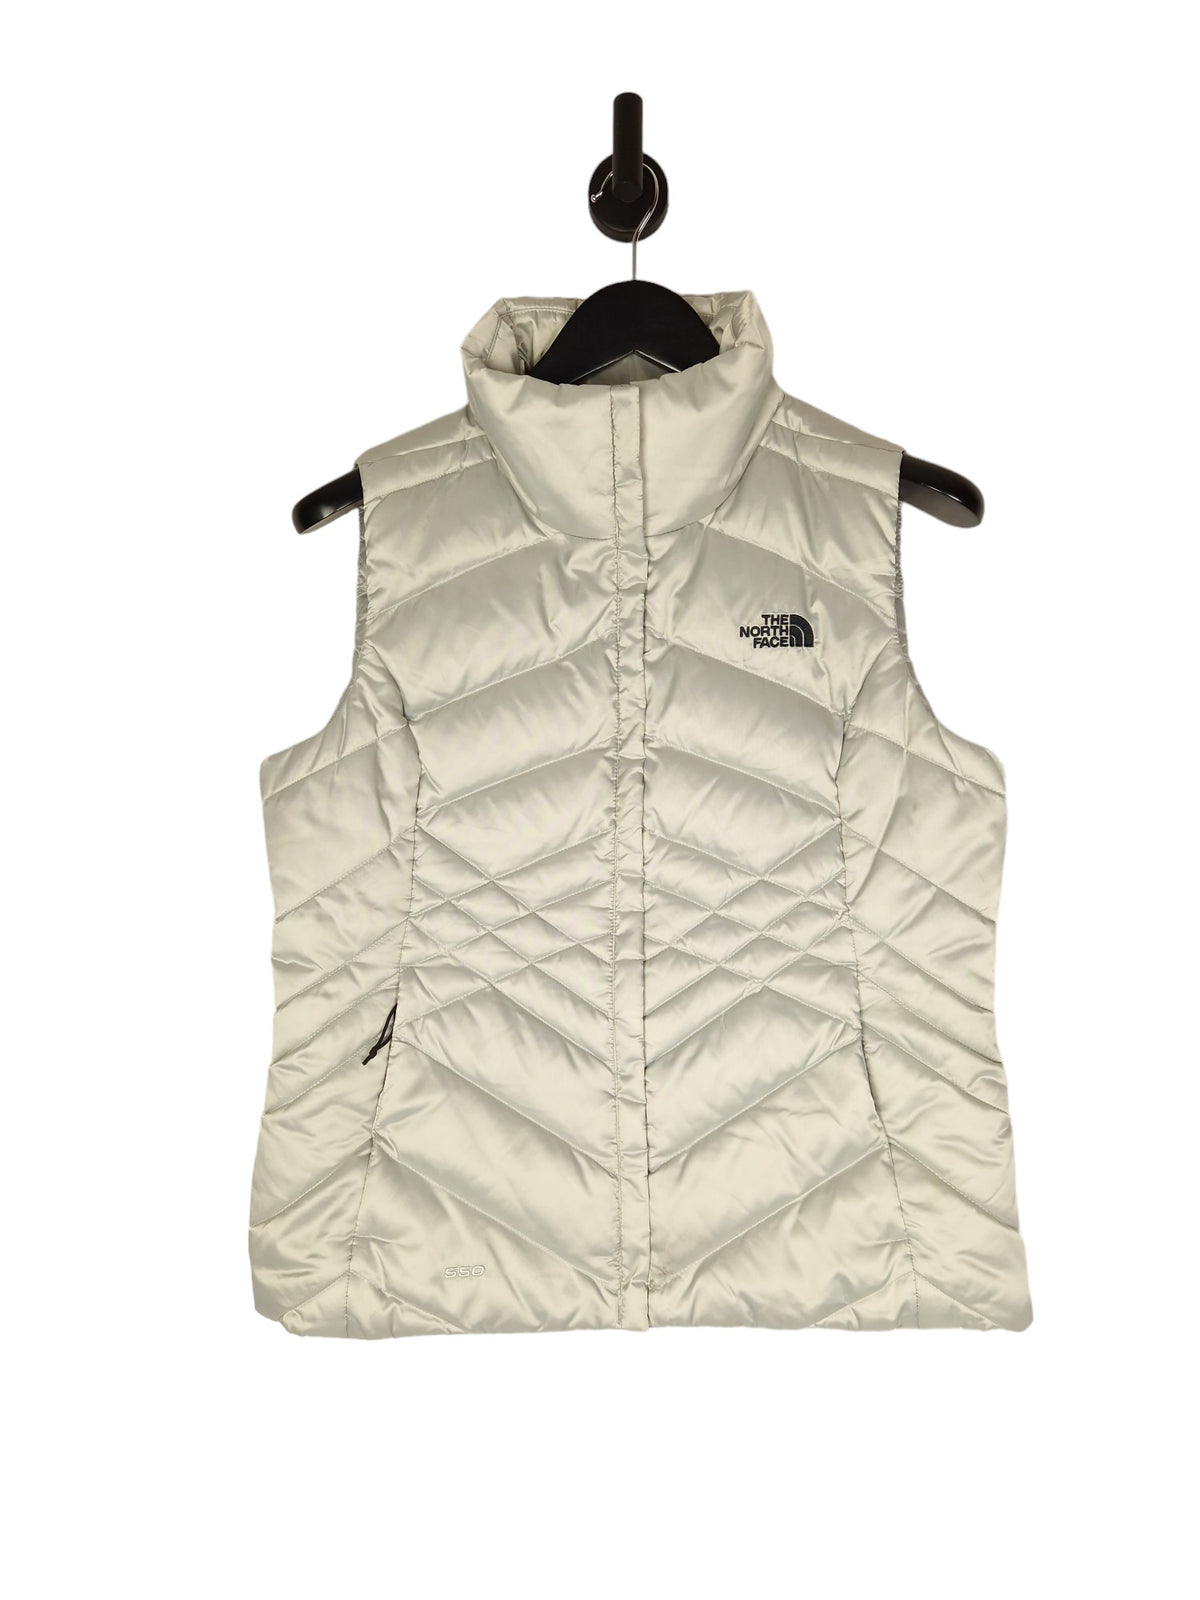 The North Face 550 Gilet Puffer Jacket - Size M UK 10